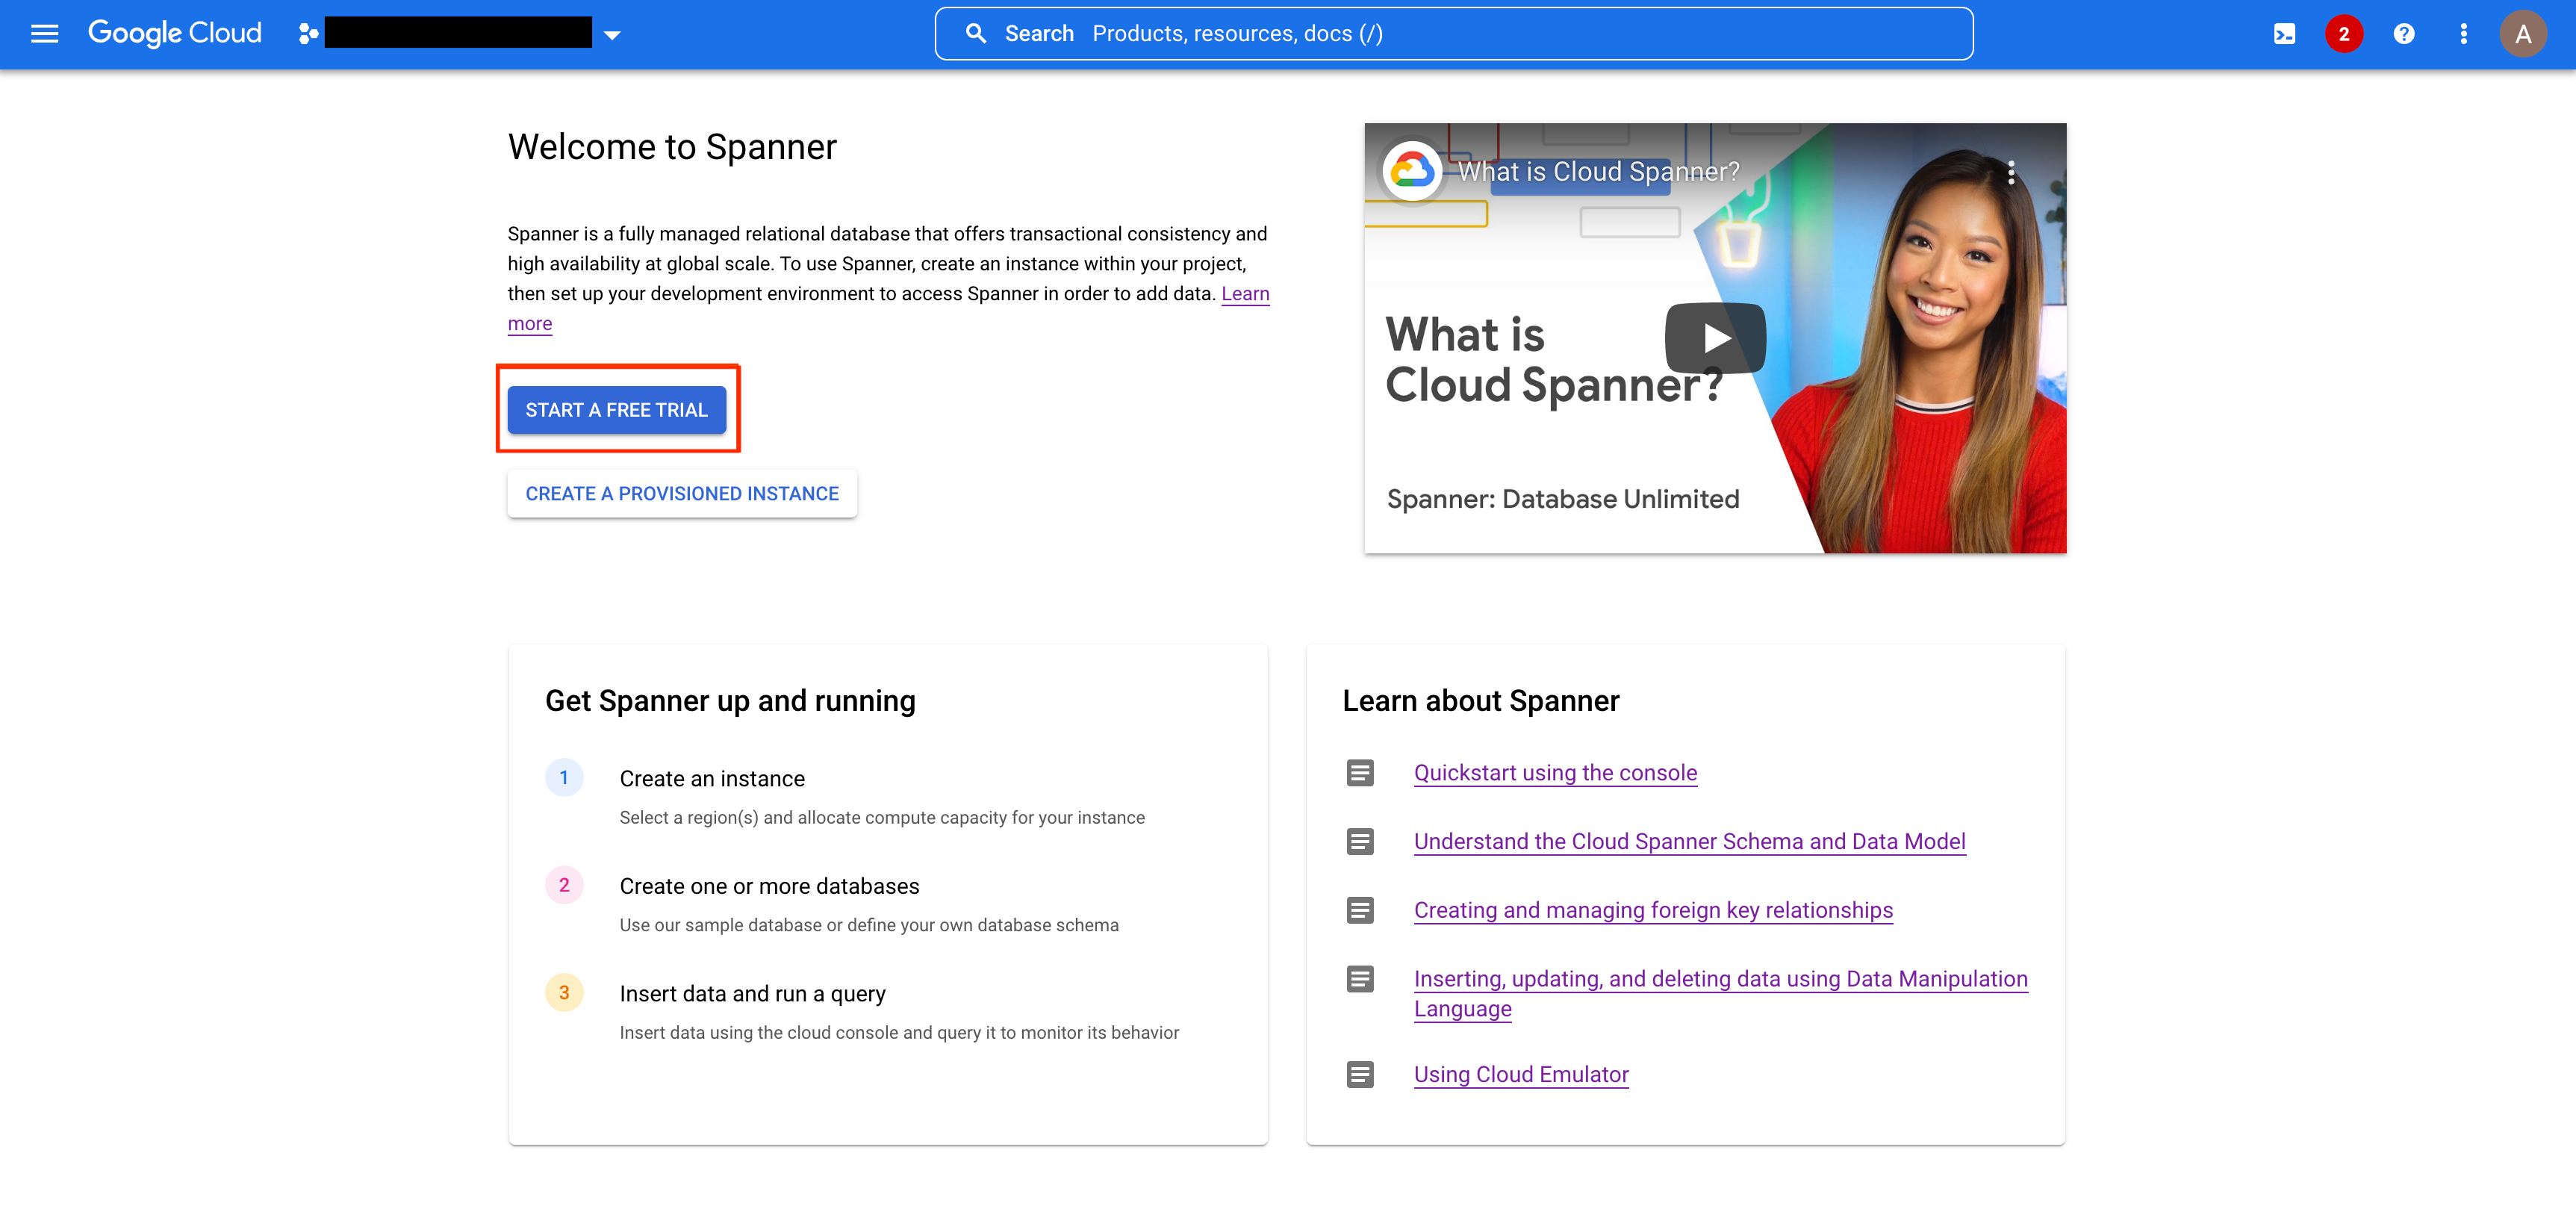 Screenshot of the Spanner landing page in the Google Cloud console, highlighting the Start a free trial button.